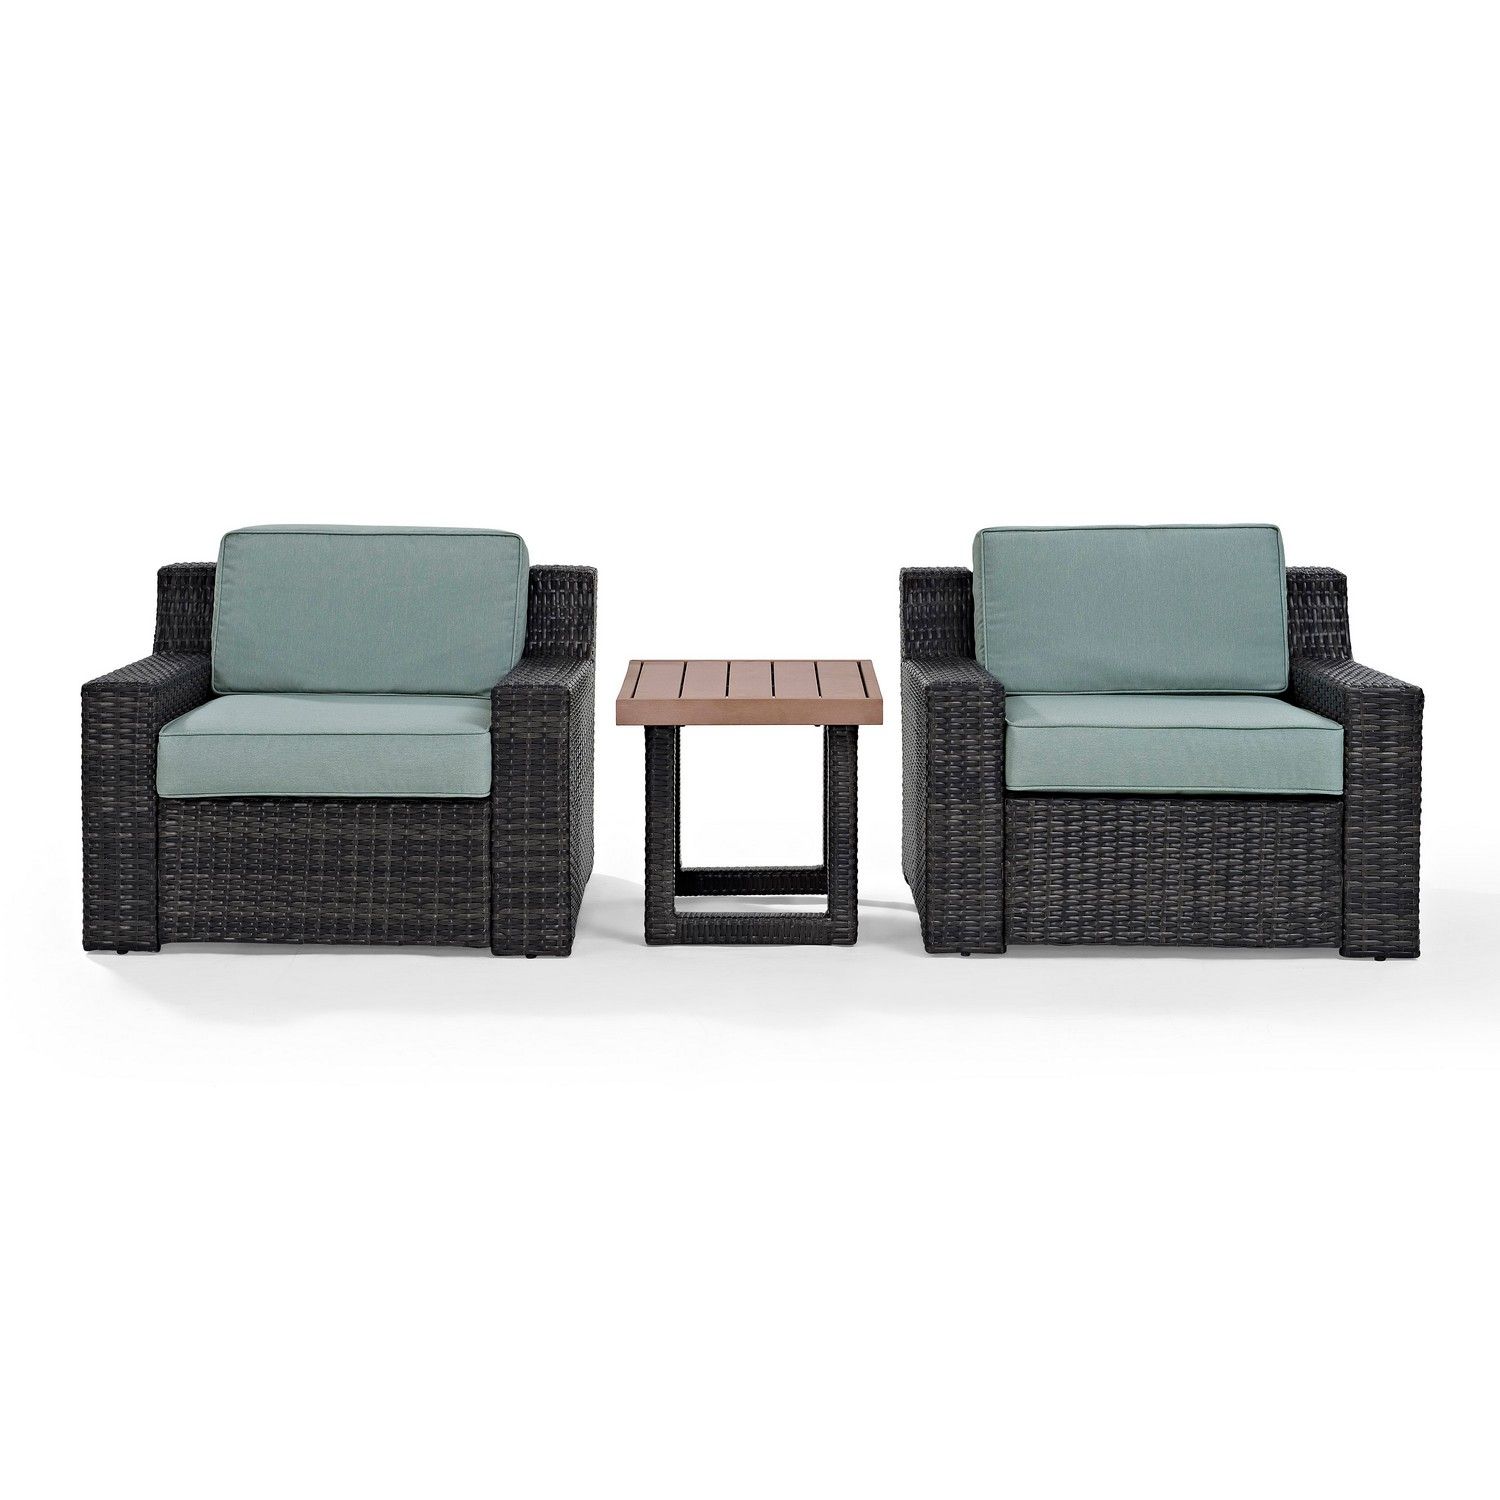 Crosley Beaufort 3-PC Outdoor Wicker Chair Set - Side Table and 2 Chairs - Mist/Brown